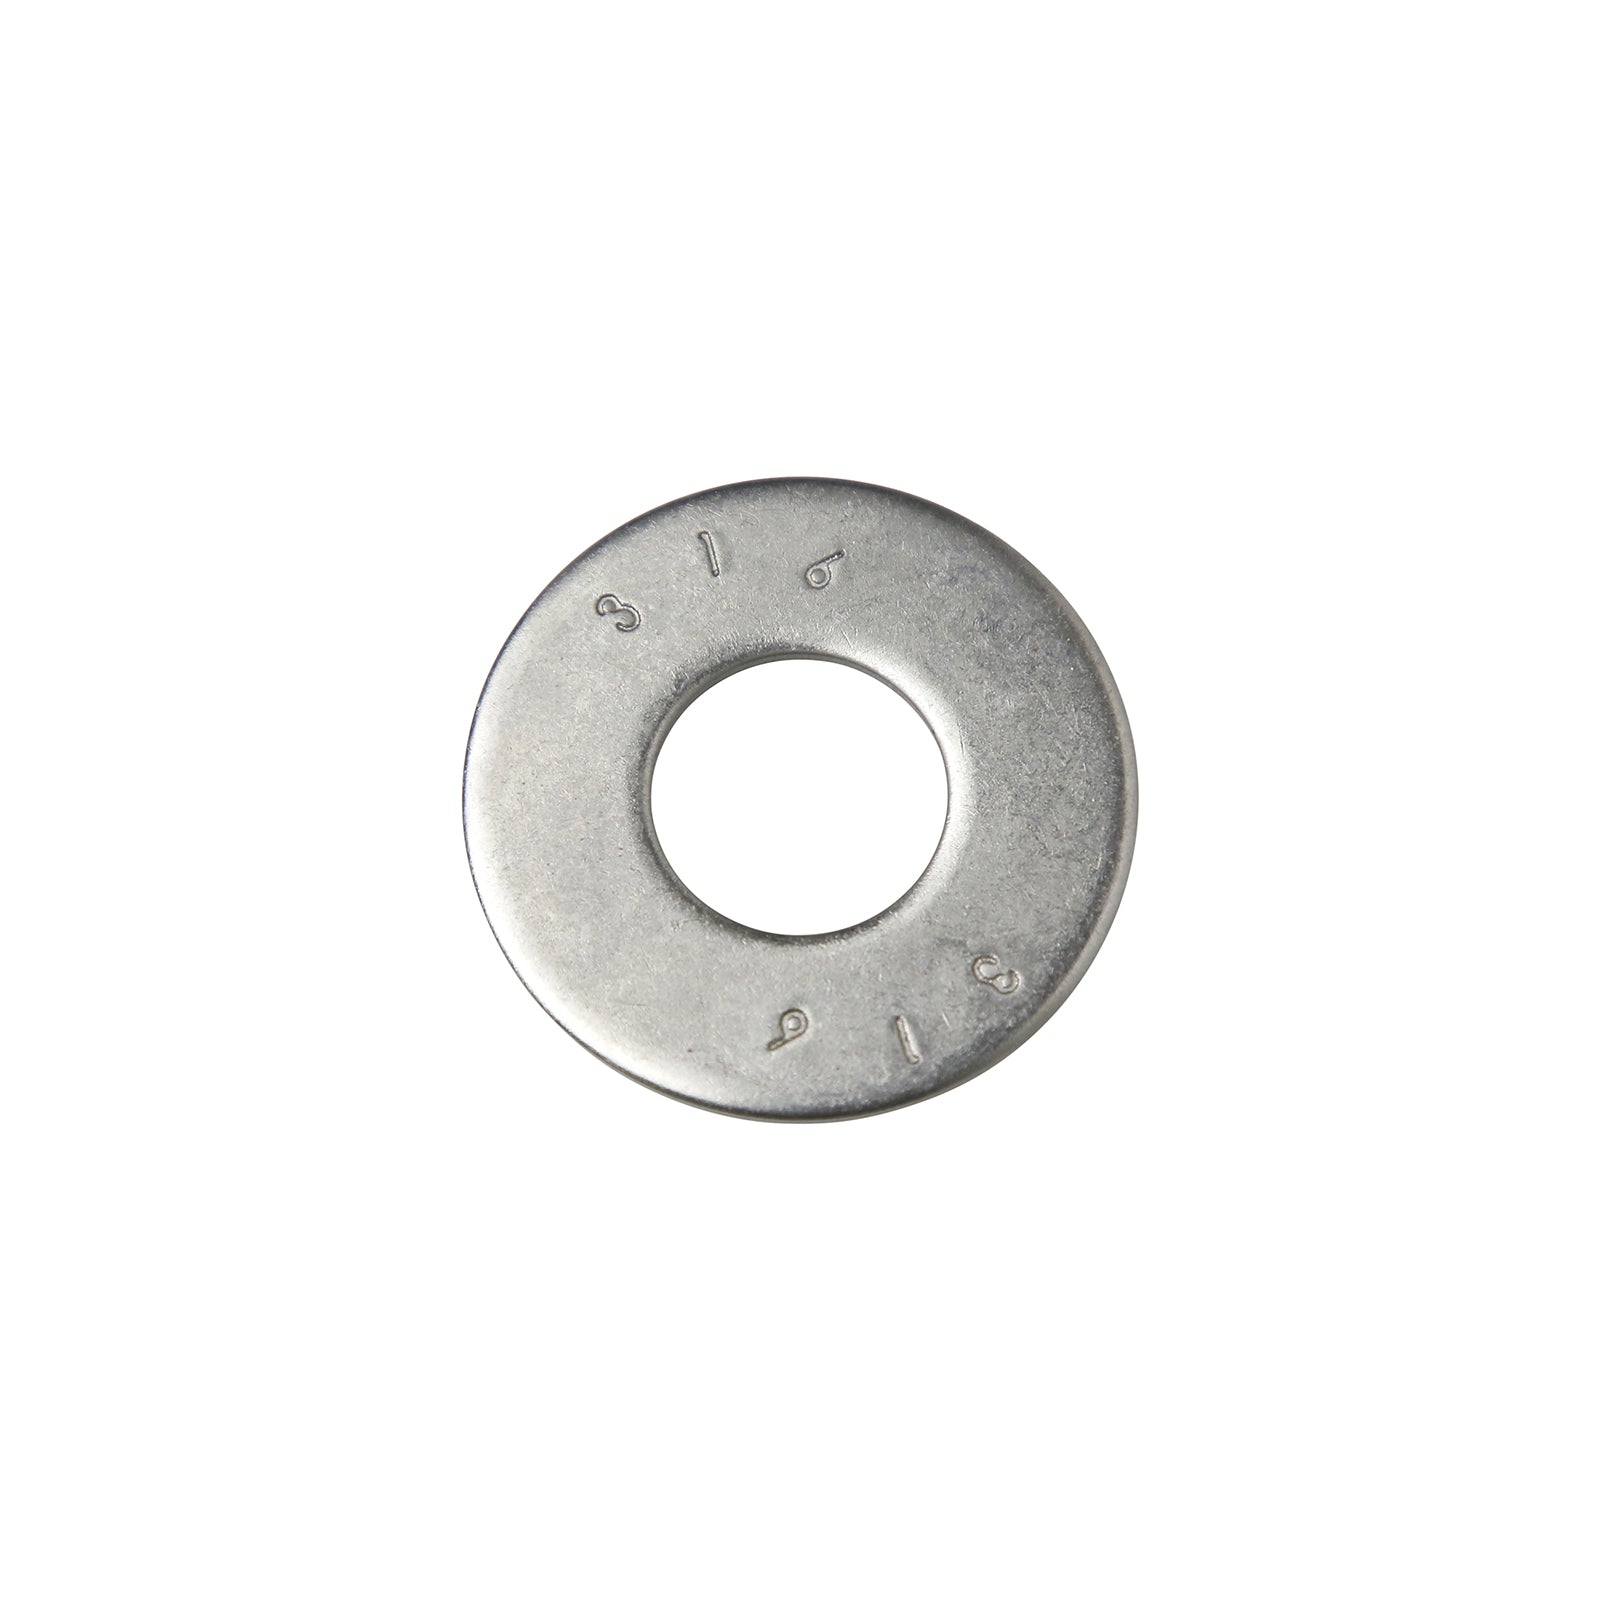 3/4" Conquest USS Flat Washer - 316 Stainless Steel